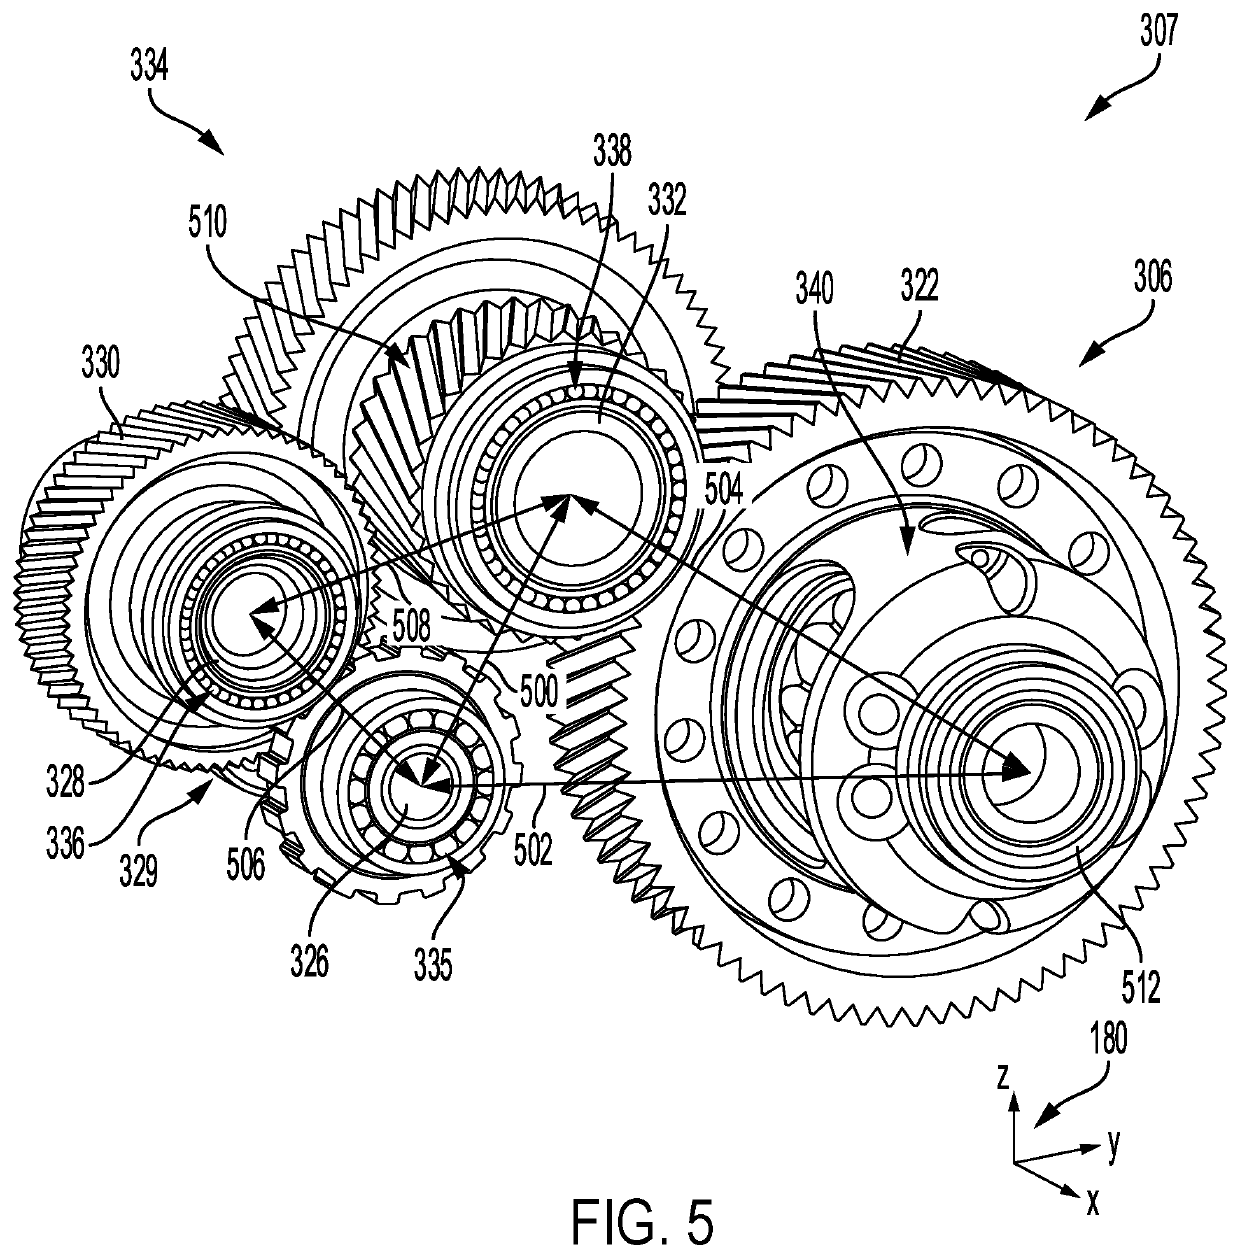 Vehicle product line with multiple gear train assemblies